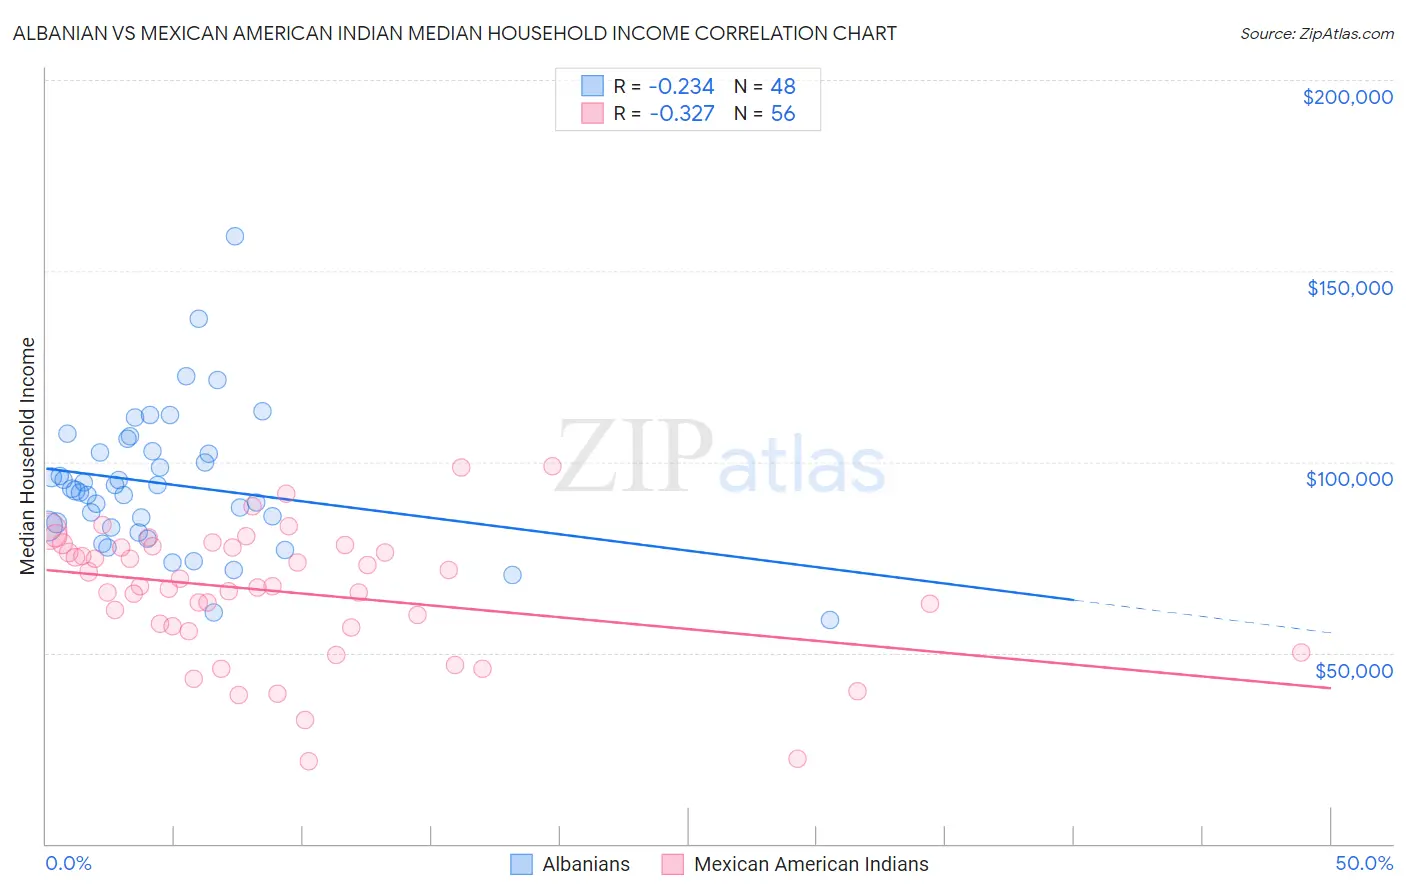 Albanian vs Mexican American Indian Median Household Income